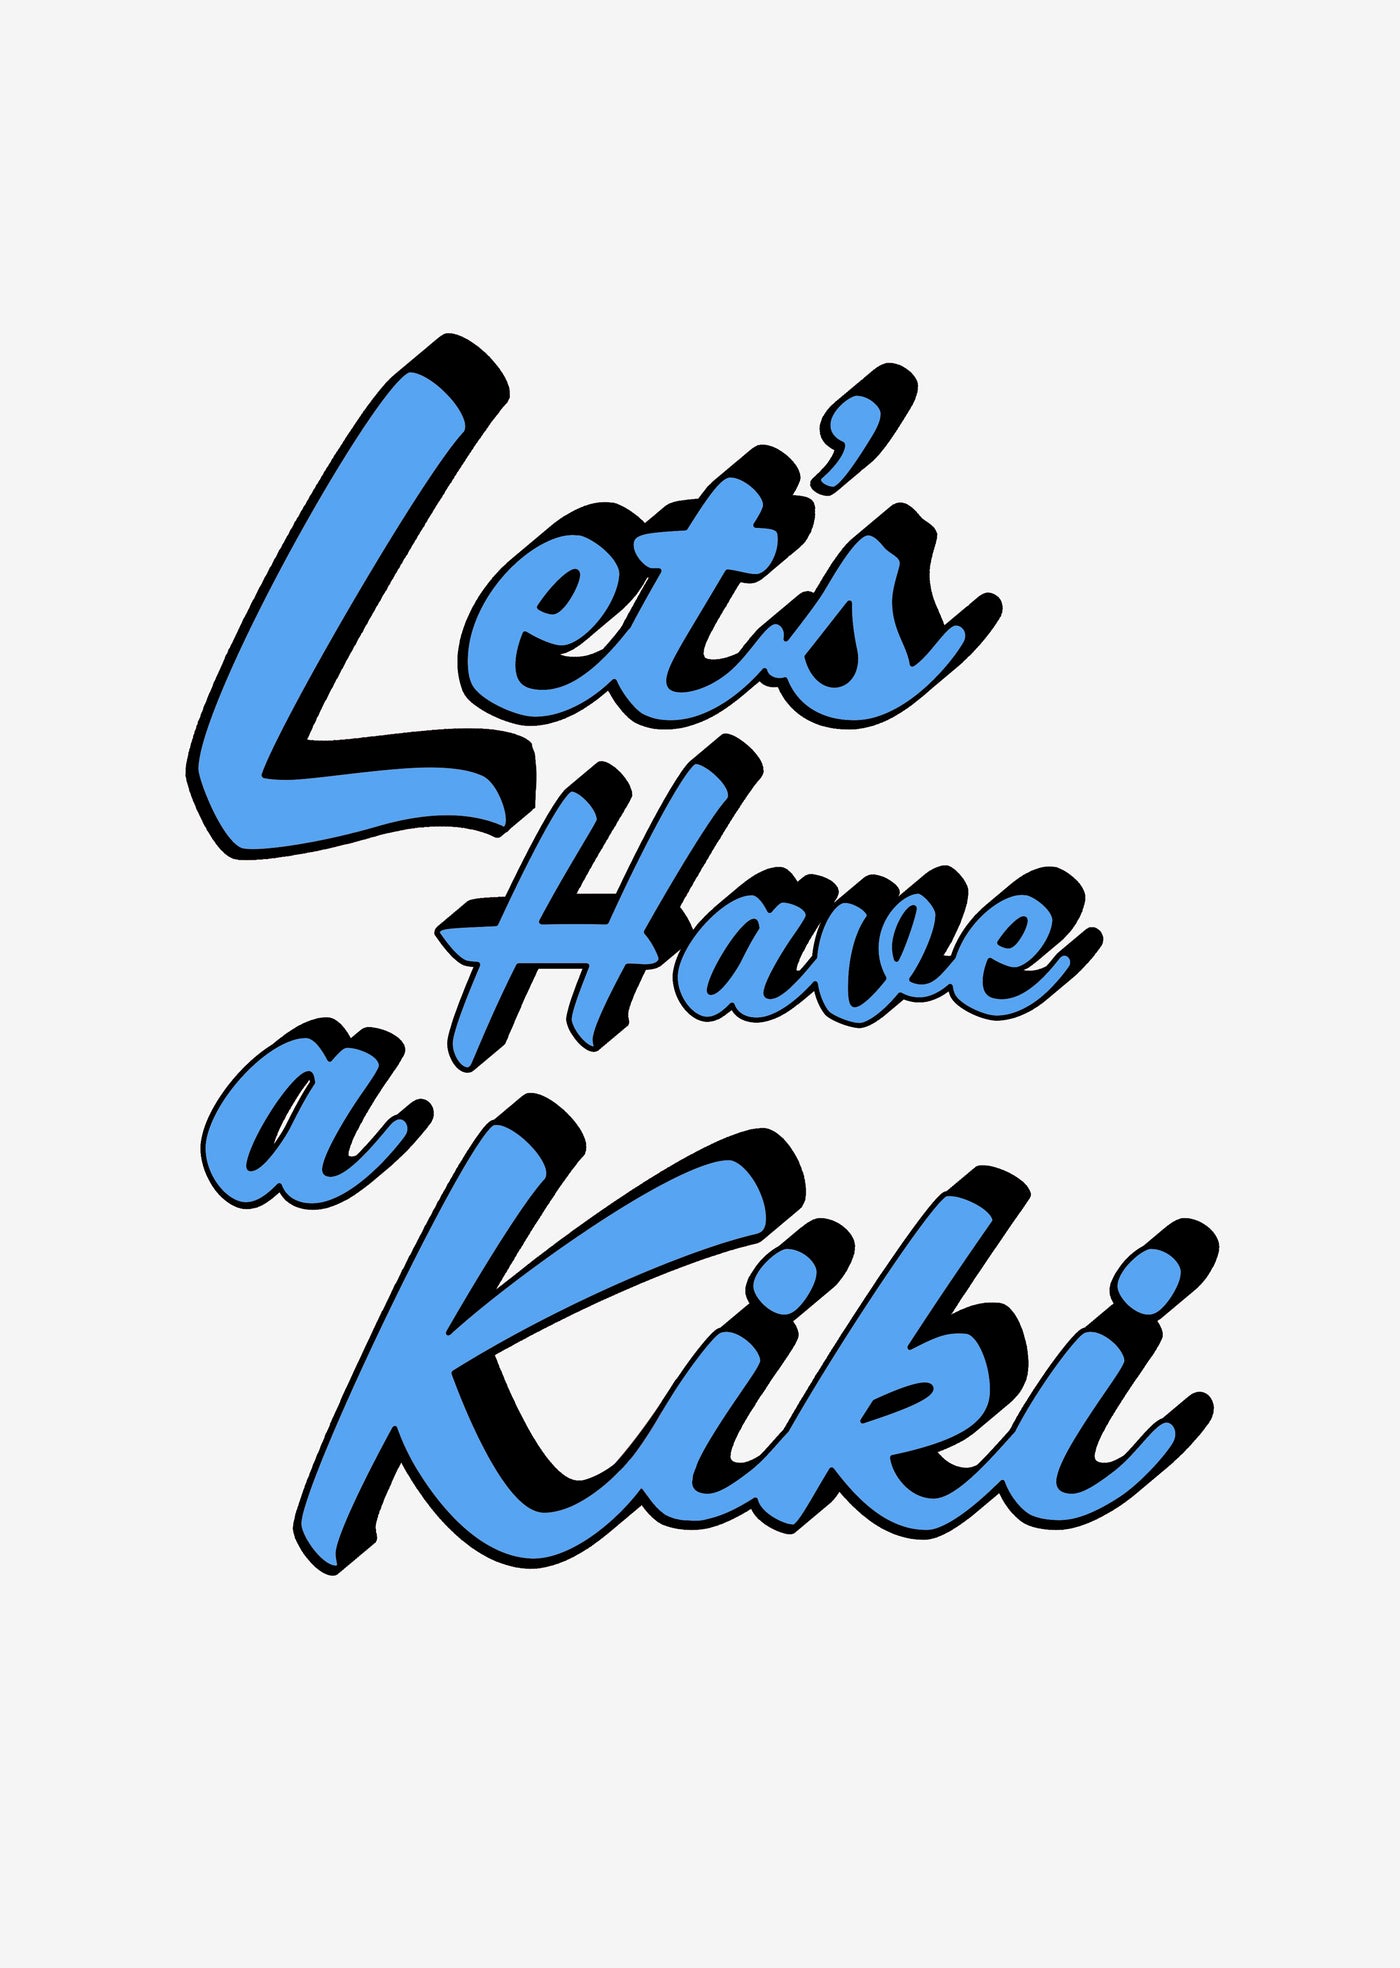 Lets Have a Kiki' Typographic Wall Art Print (Blue)